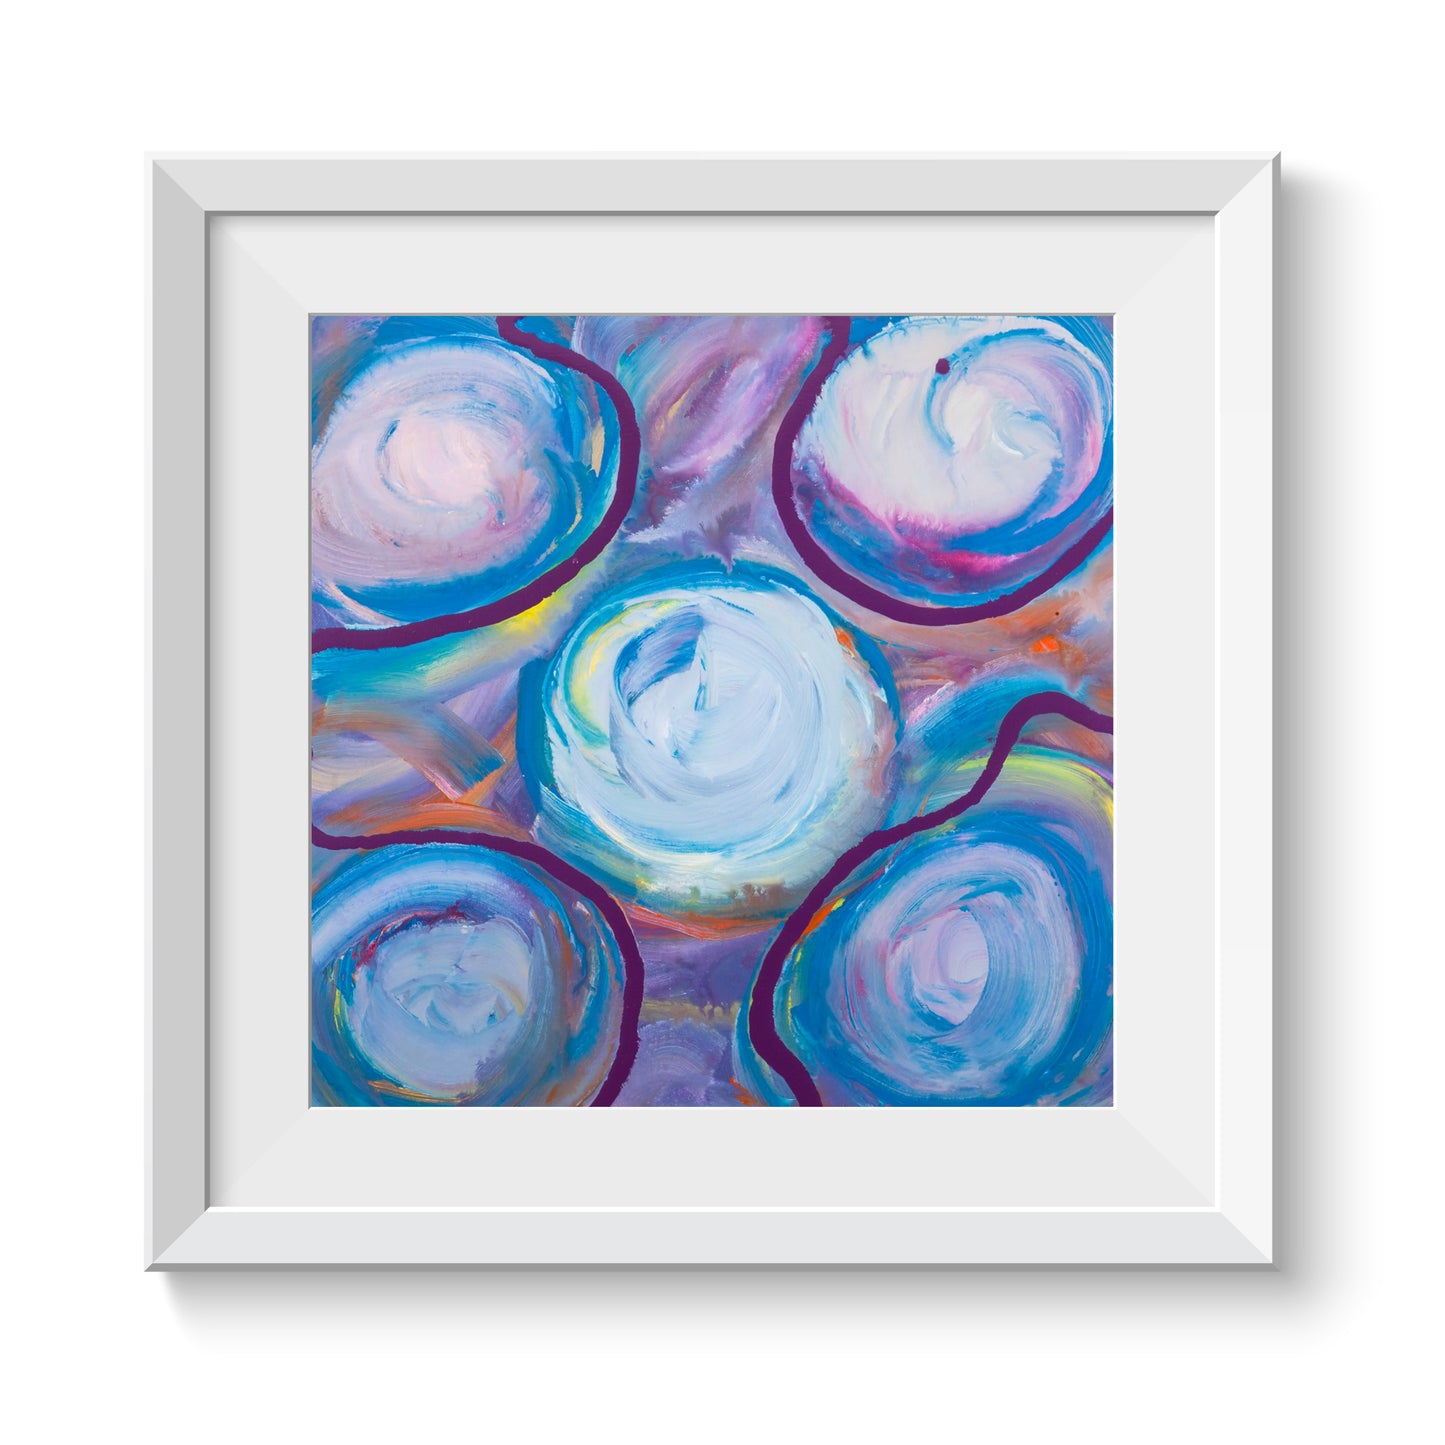 Bubbly Fantasies - Original Abstract Painting in Austin Texas 24" x 24"